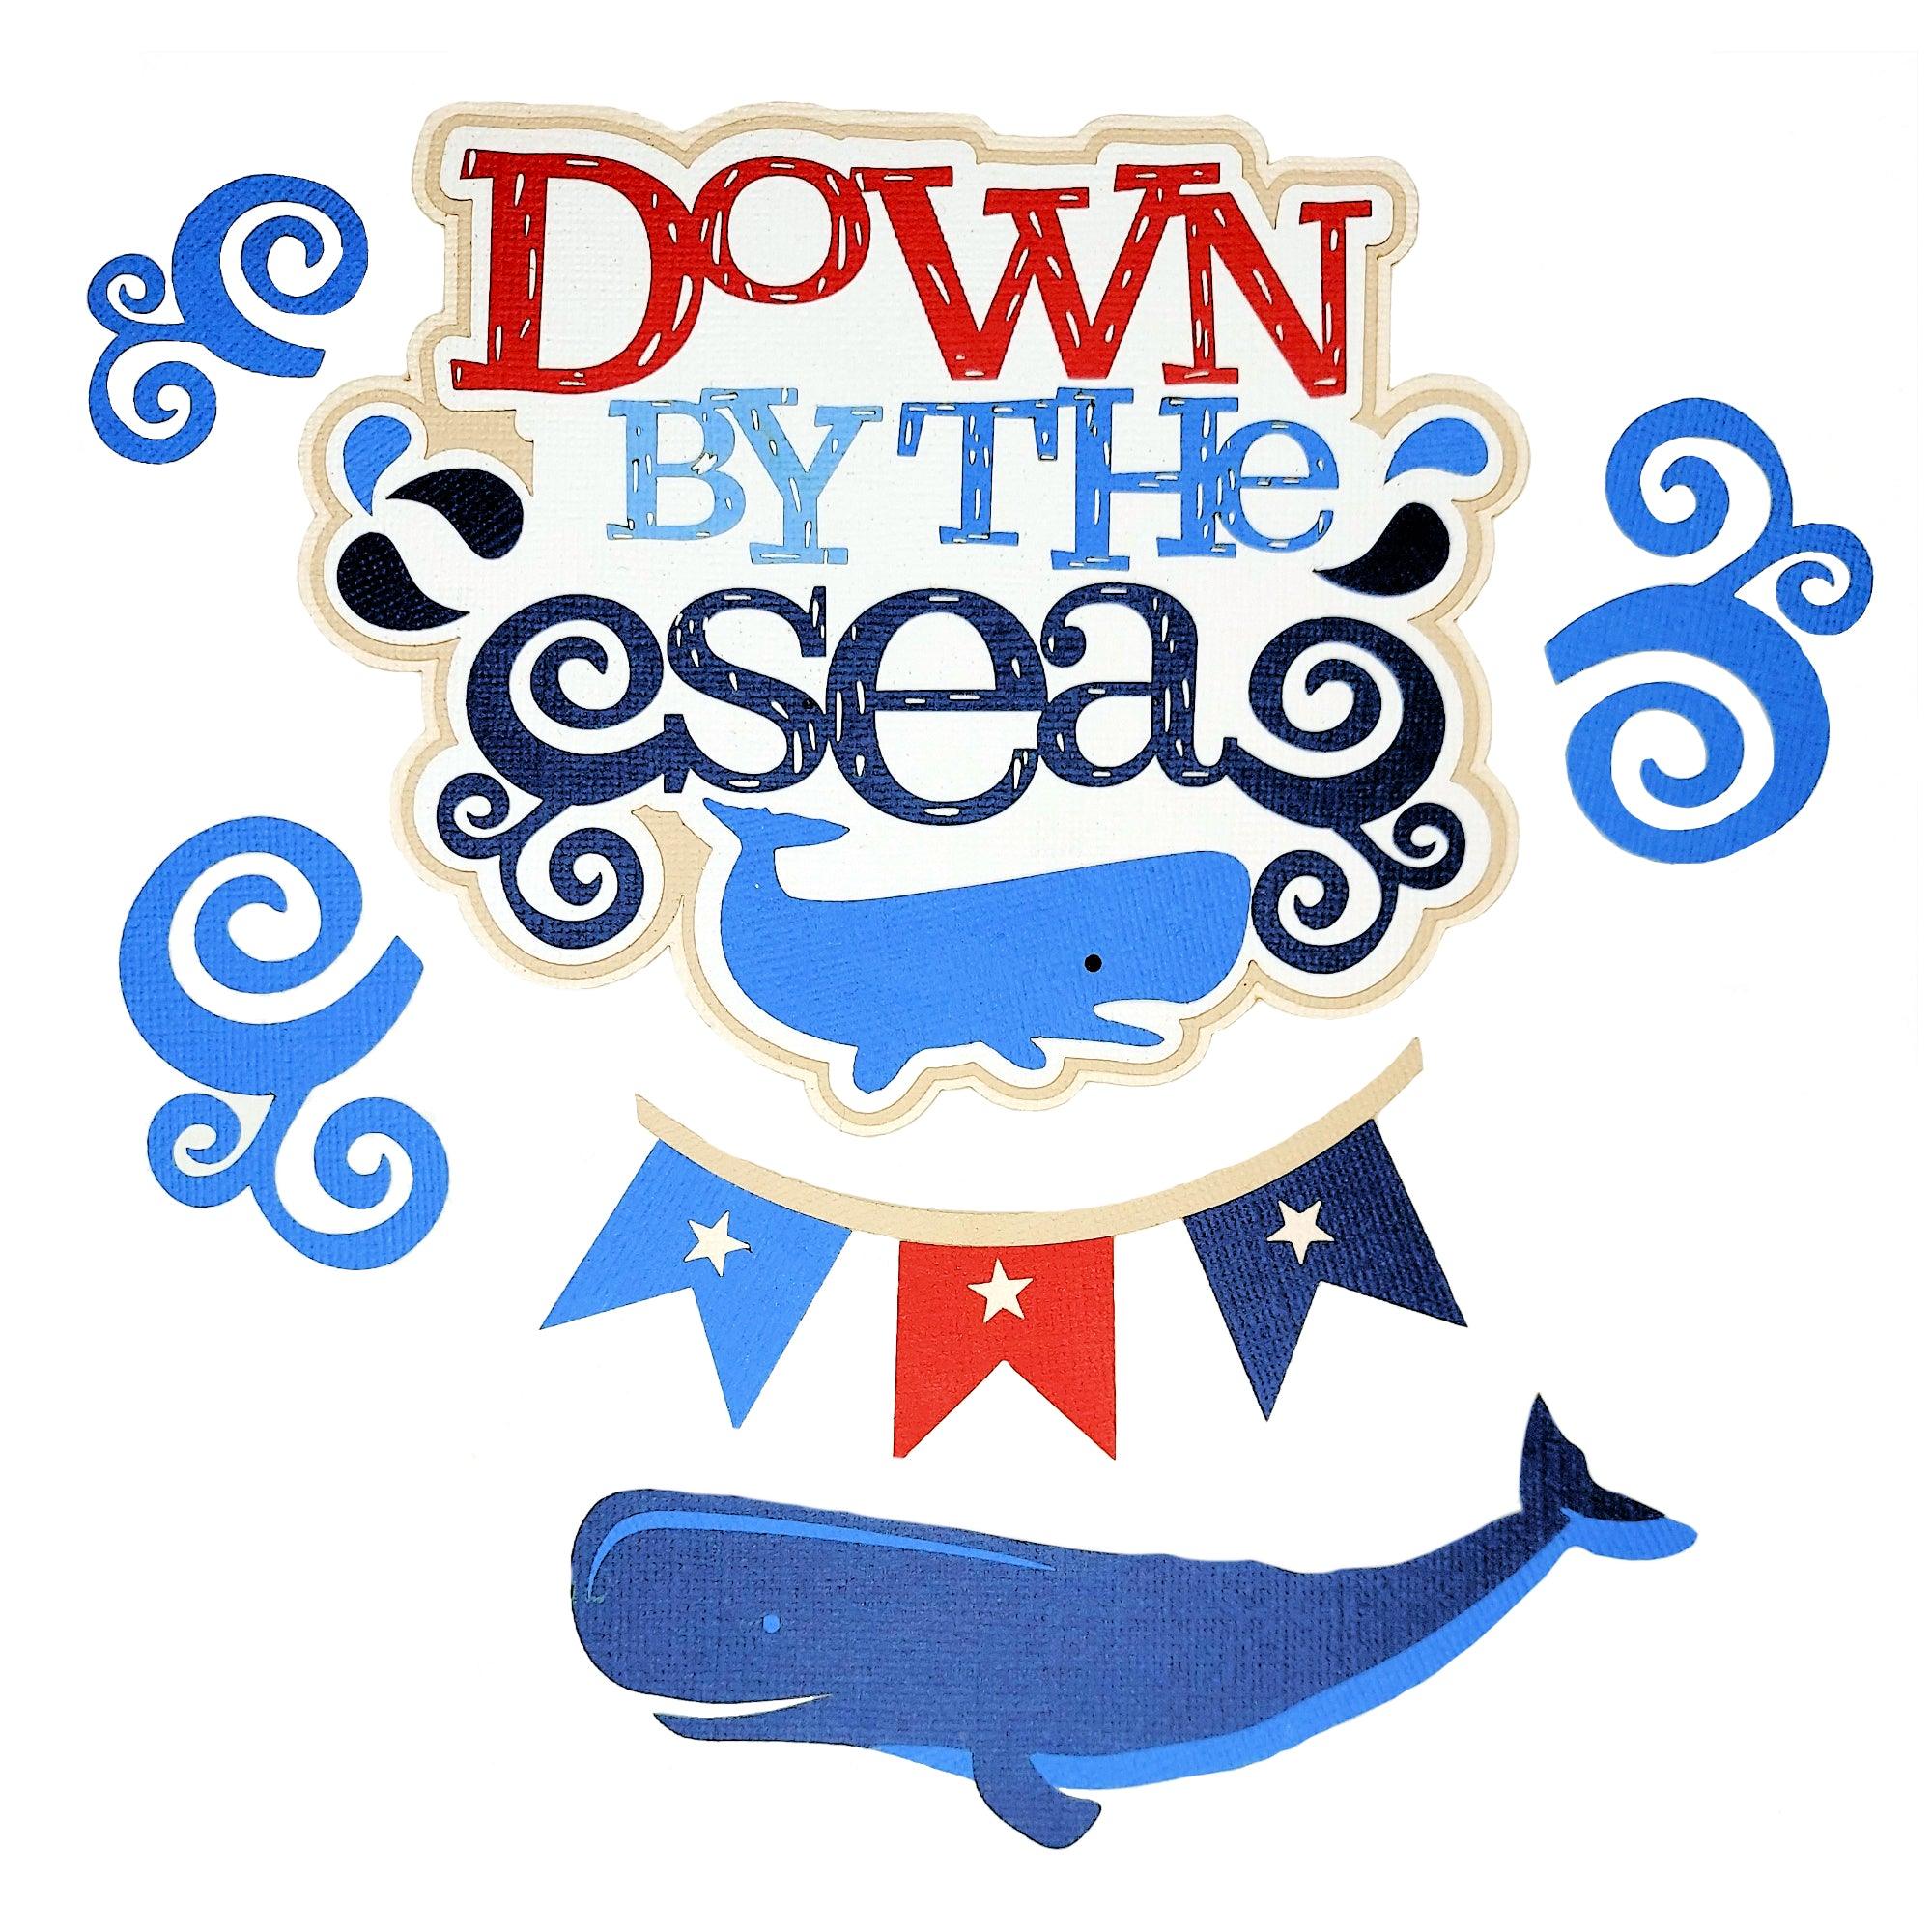 Down by the Sea 6 x 7 Laser Cut Scrapbook Embellishment by SSC Laser Designs-